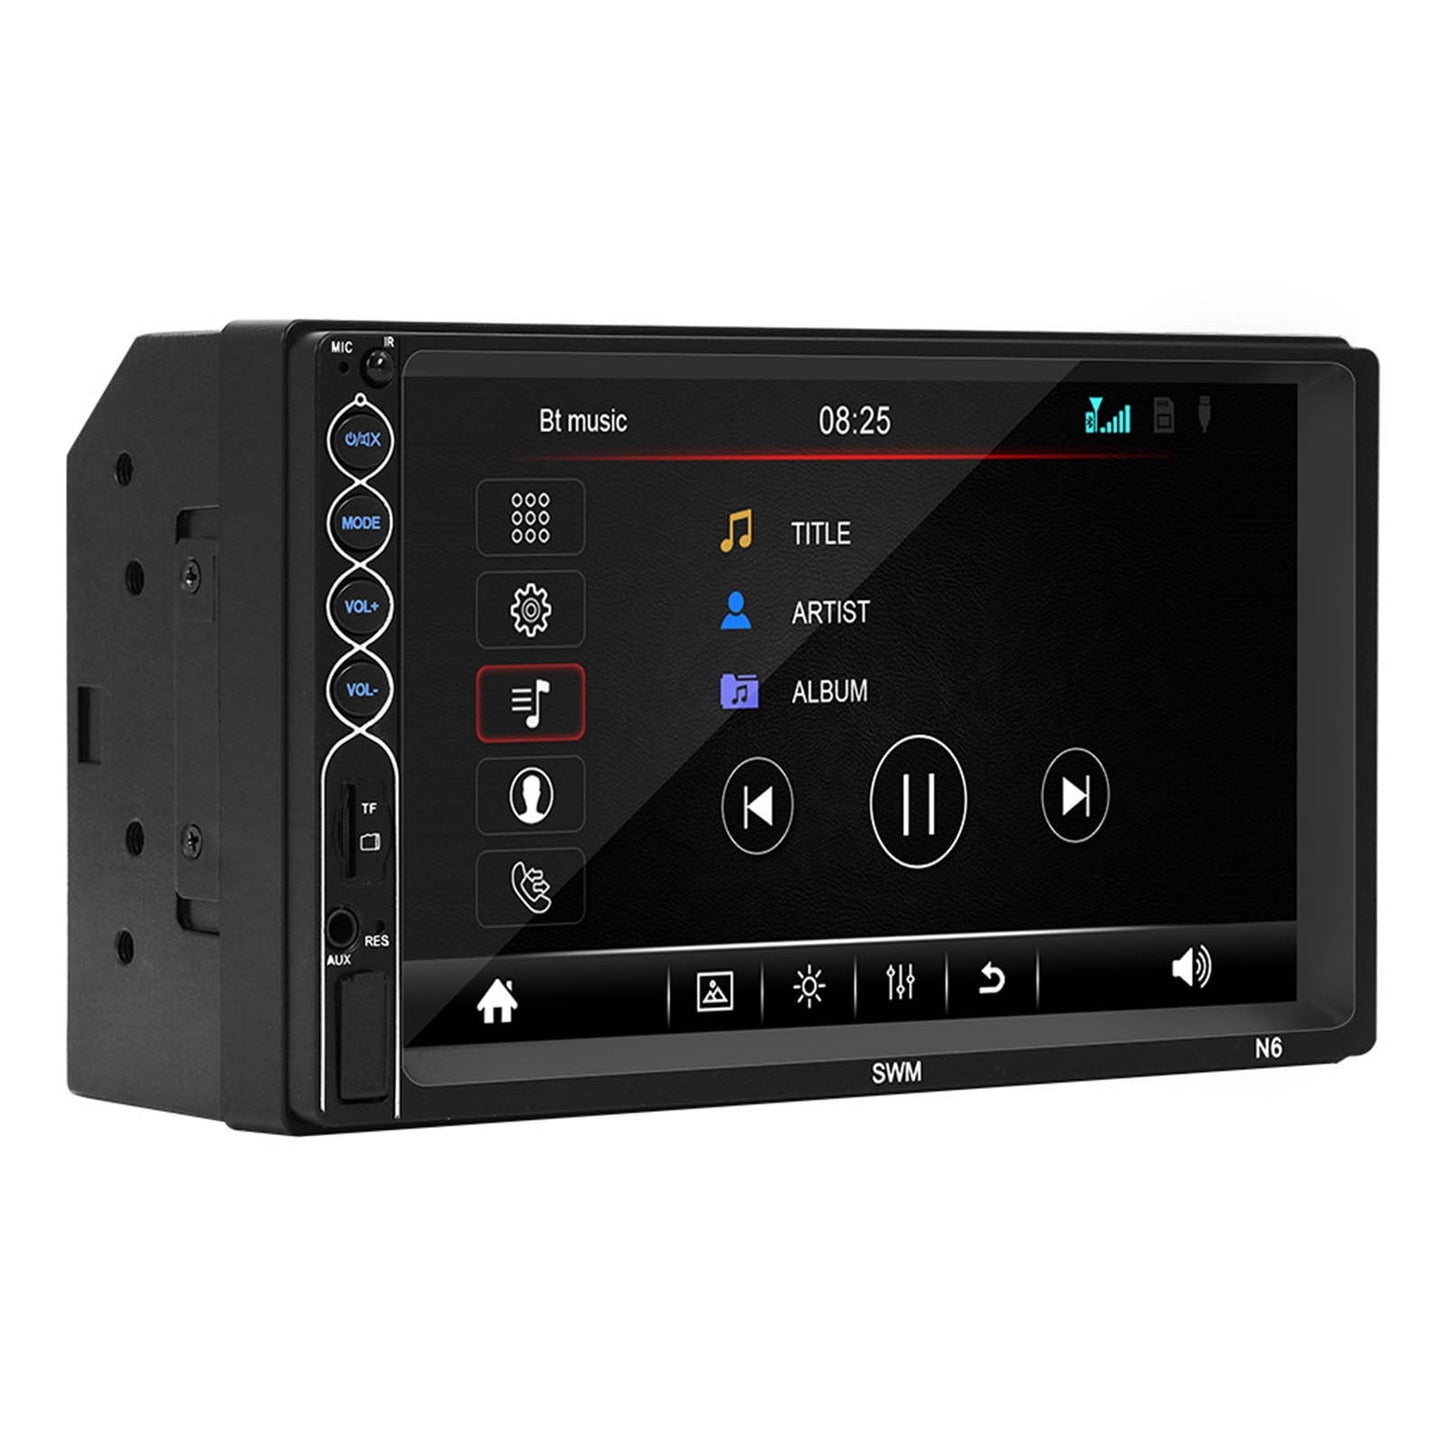 "Christmas Savings Feltree Car Essential Product Car MP5 Player Stereo Radio 7In 2DIN Touching Screen,FM/TF/AUX Player Bluetooth With Backup Camera"